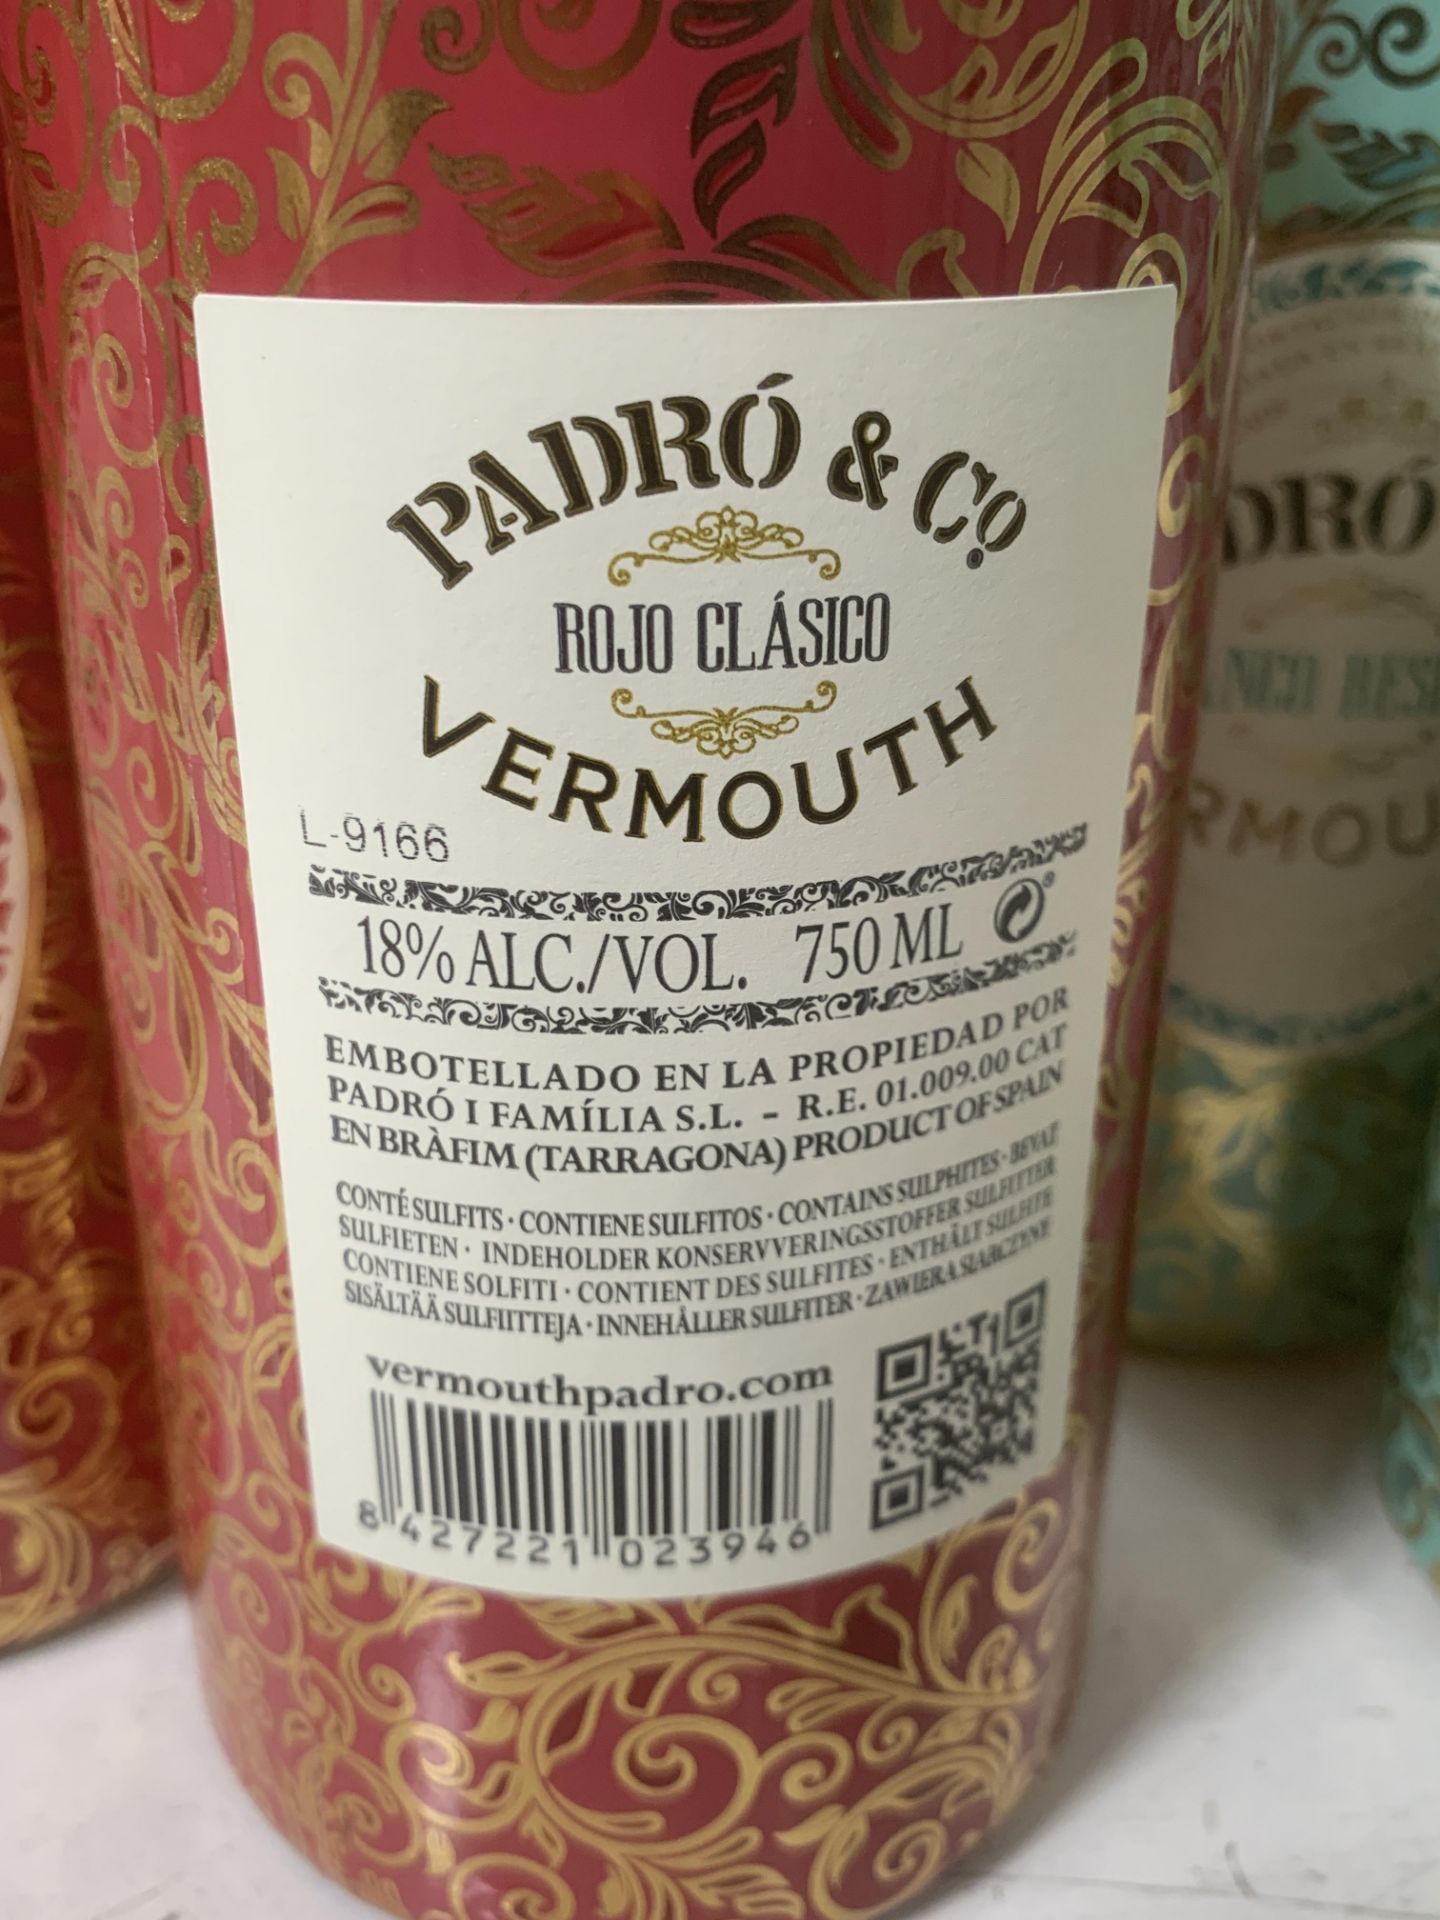 6x Padro & Co. Bottles of Vermouth; 4x Blanco Reserva 18%, 75cl and 2x Rojo Clasico 18%, 75cl - Image 4 of 5